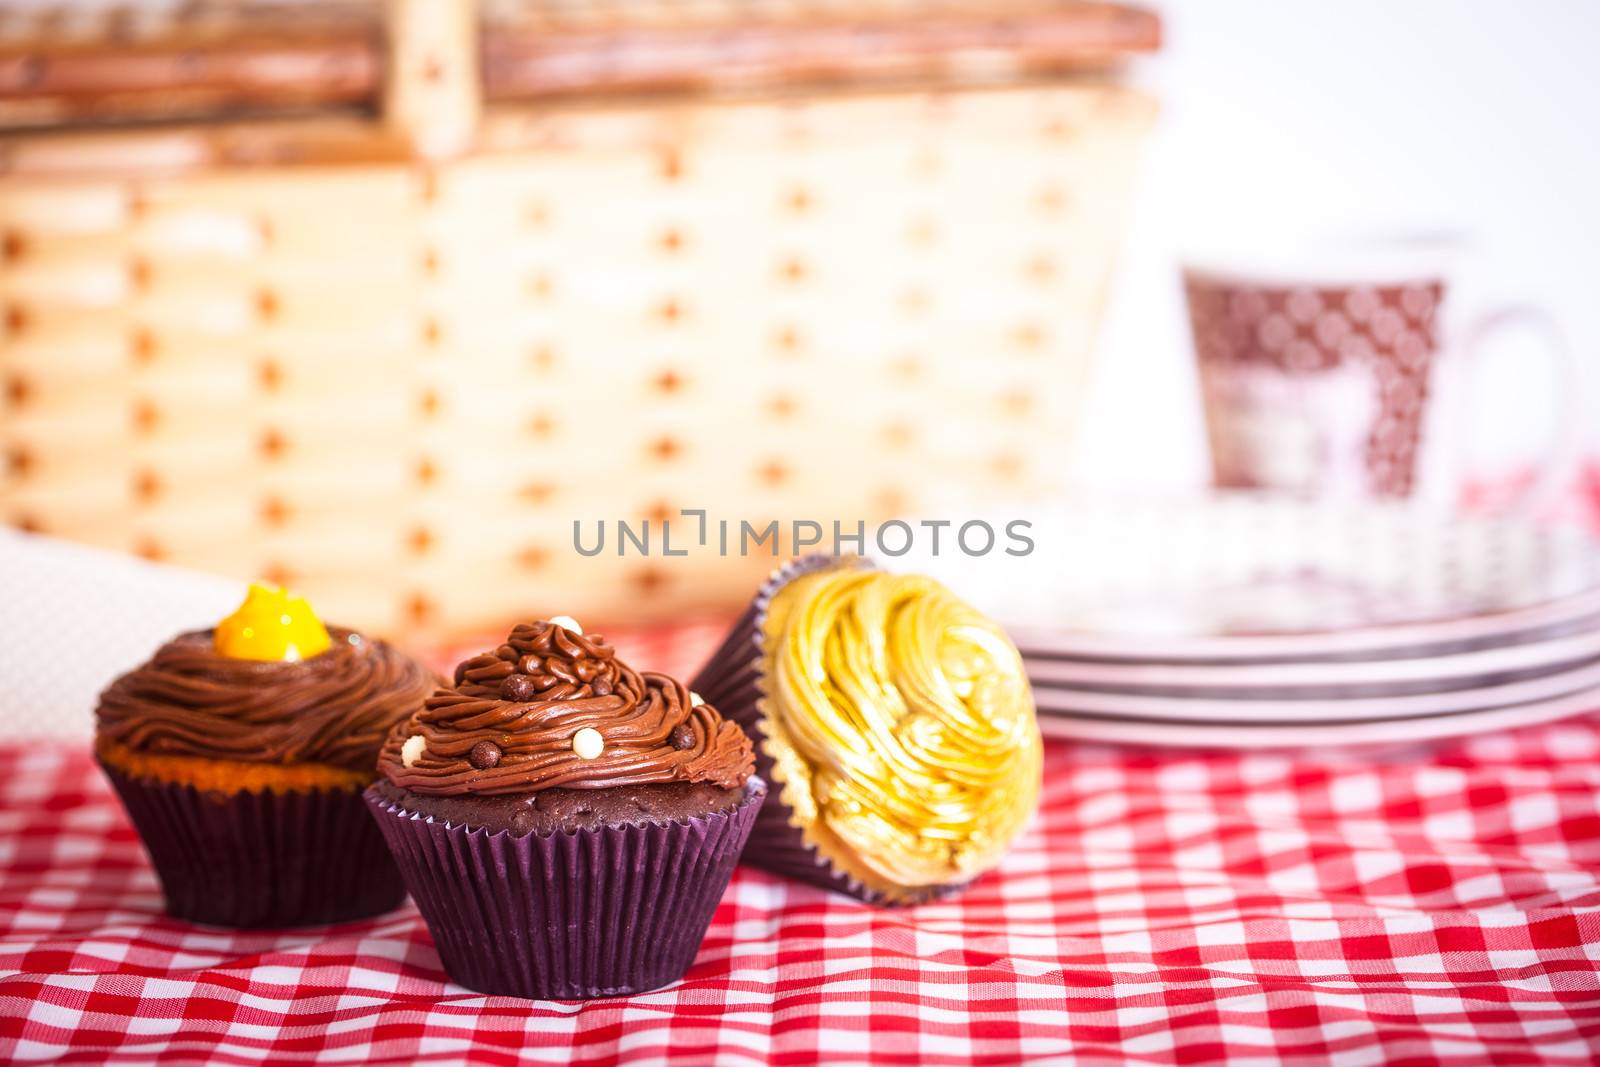 A picnic with delicious cupcakes and a beautiful picnic basket!